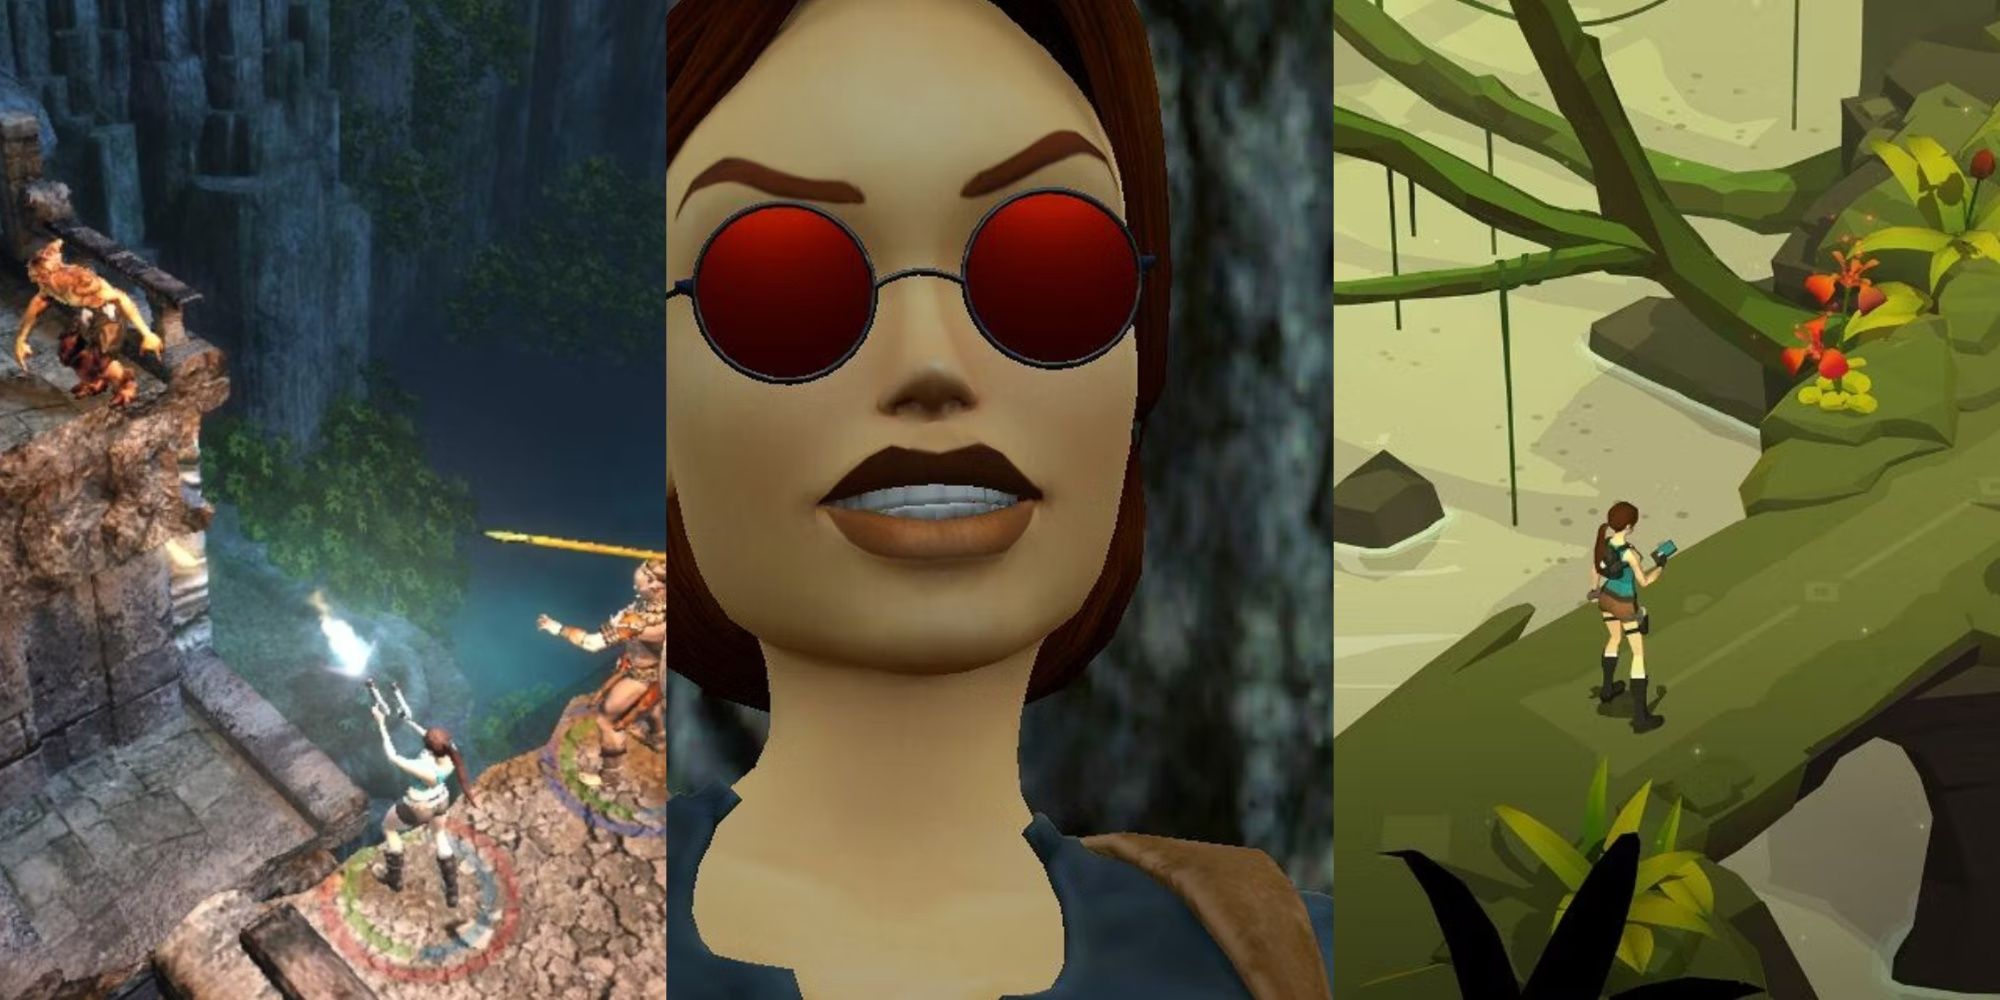 Lara Croft shooting in The Guardian Of Light, Lara smiling with Sunglasses, and Lara looking at a device in her hands in Lara Croft Go, left to right